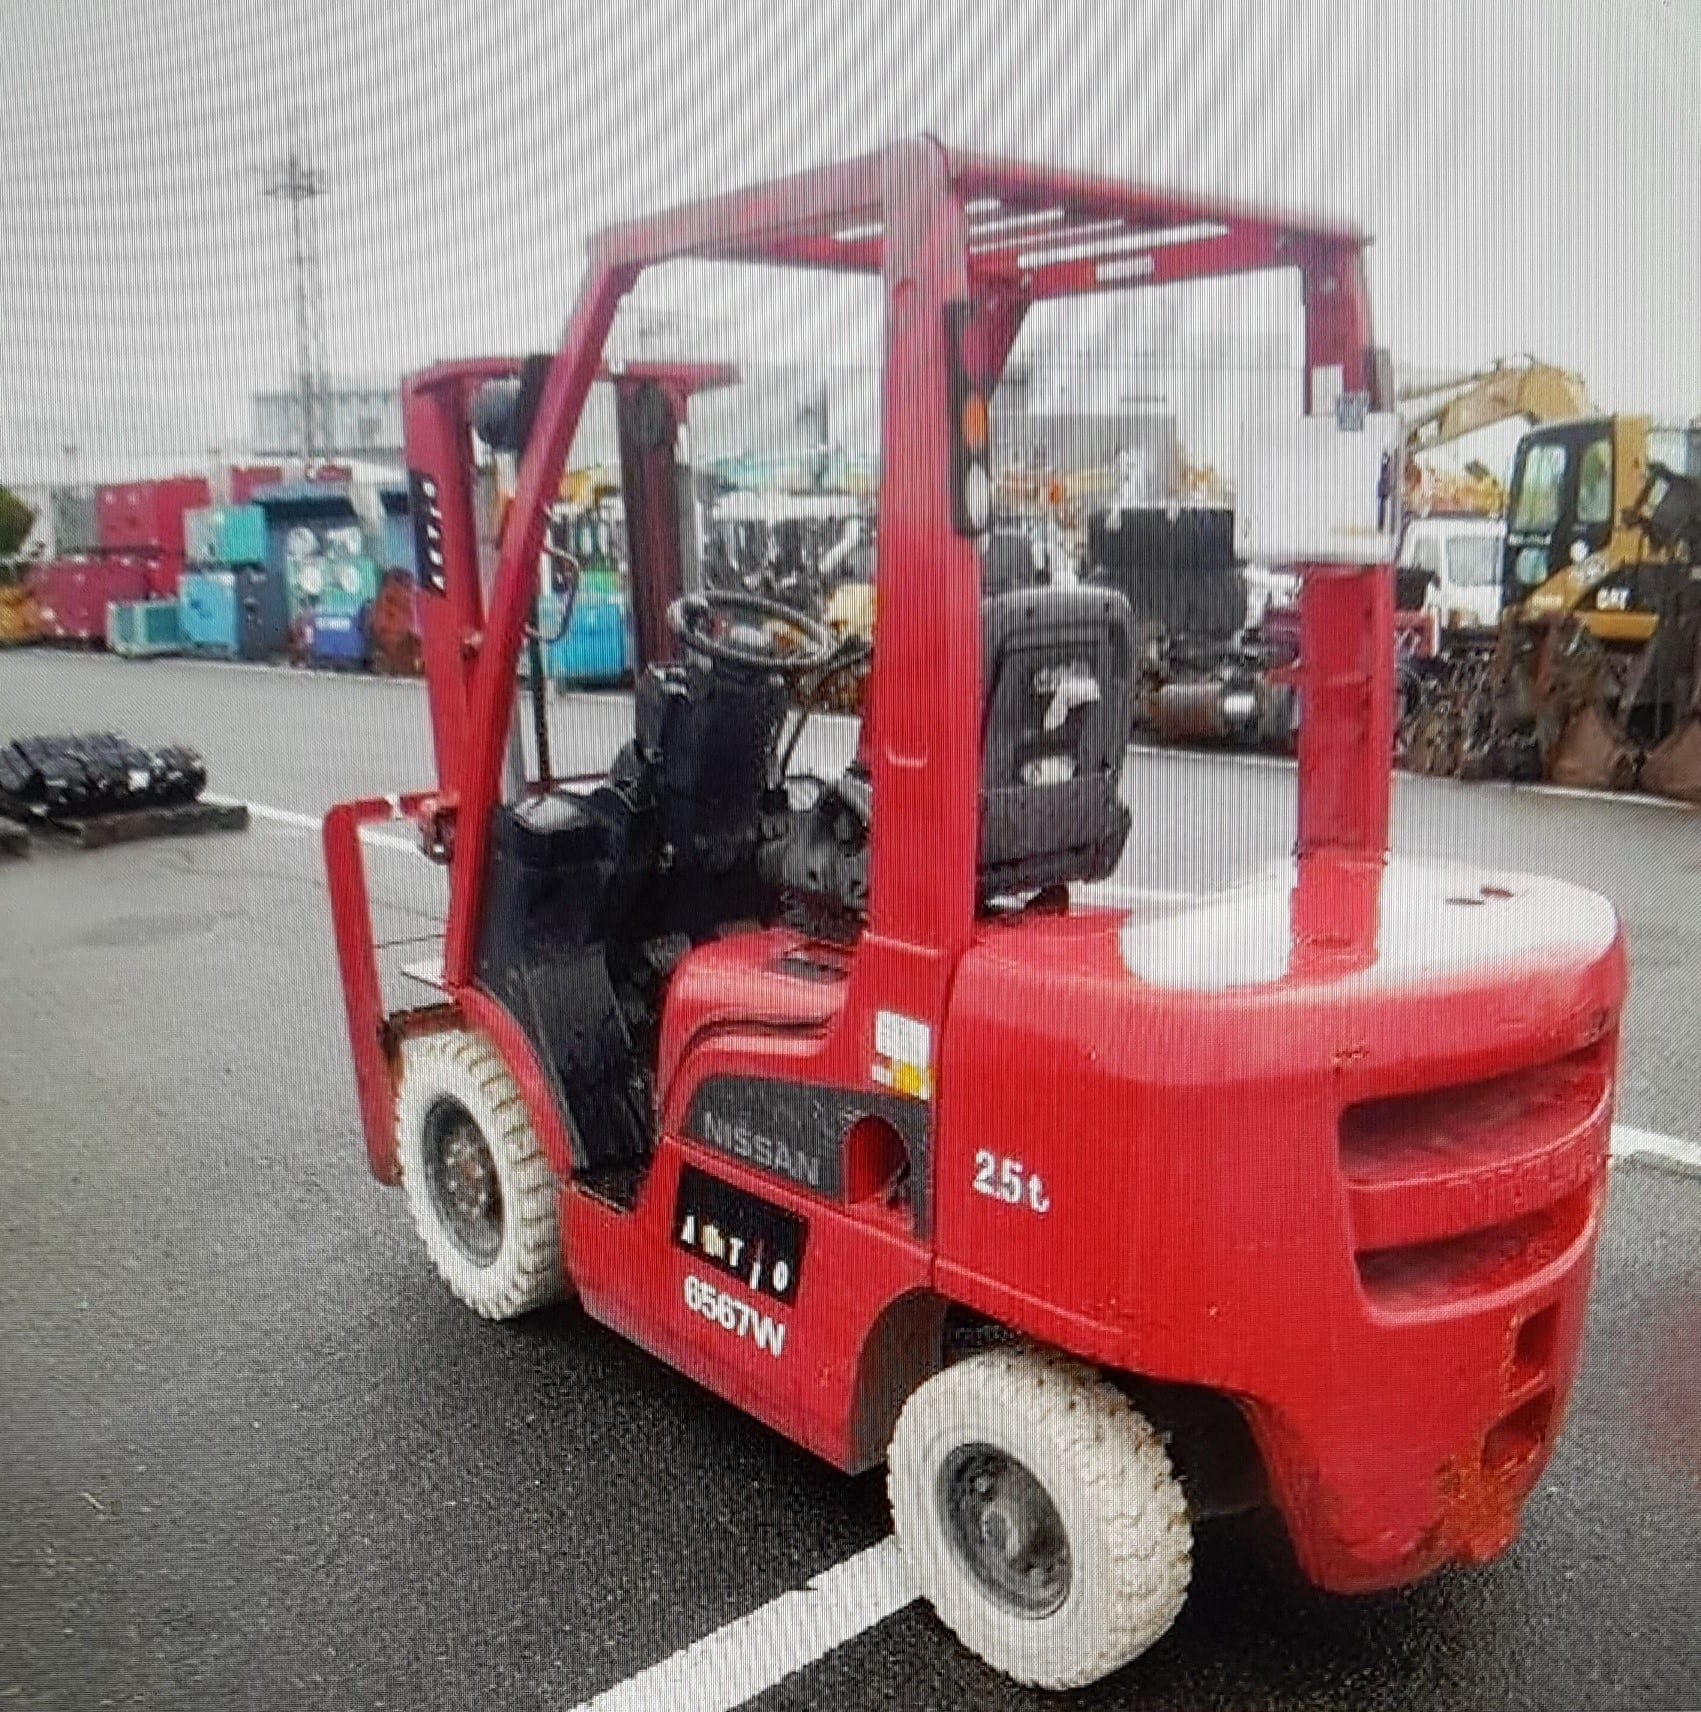 used forklift for sale in malaysia